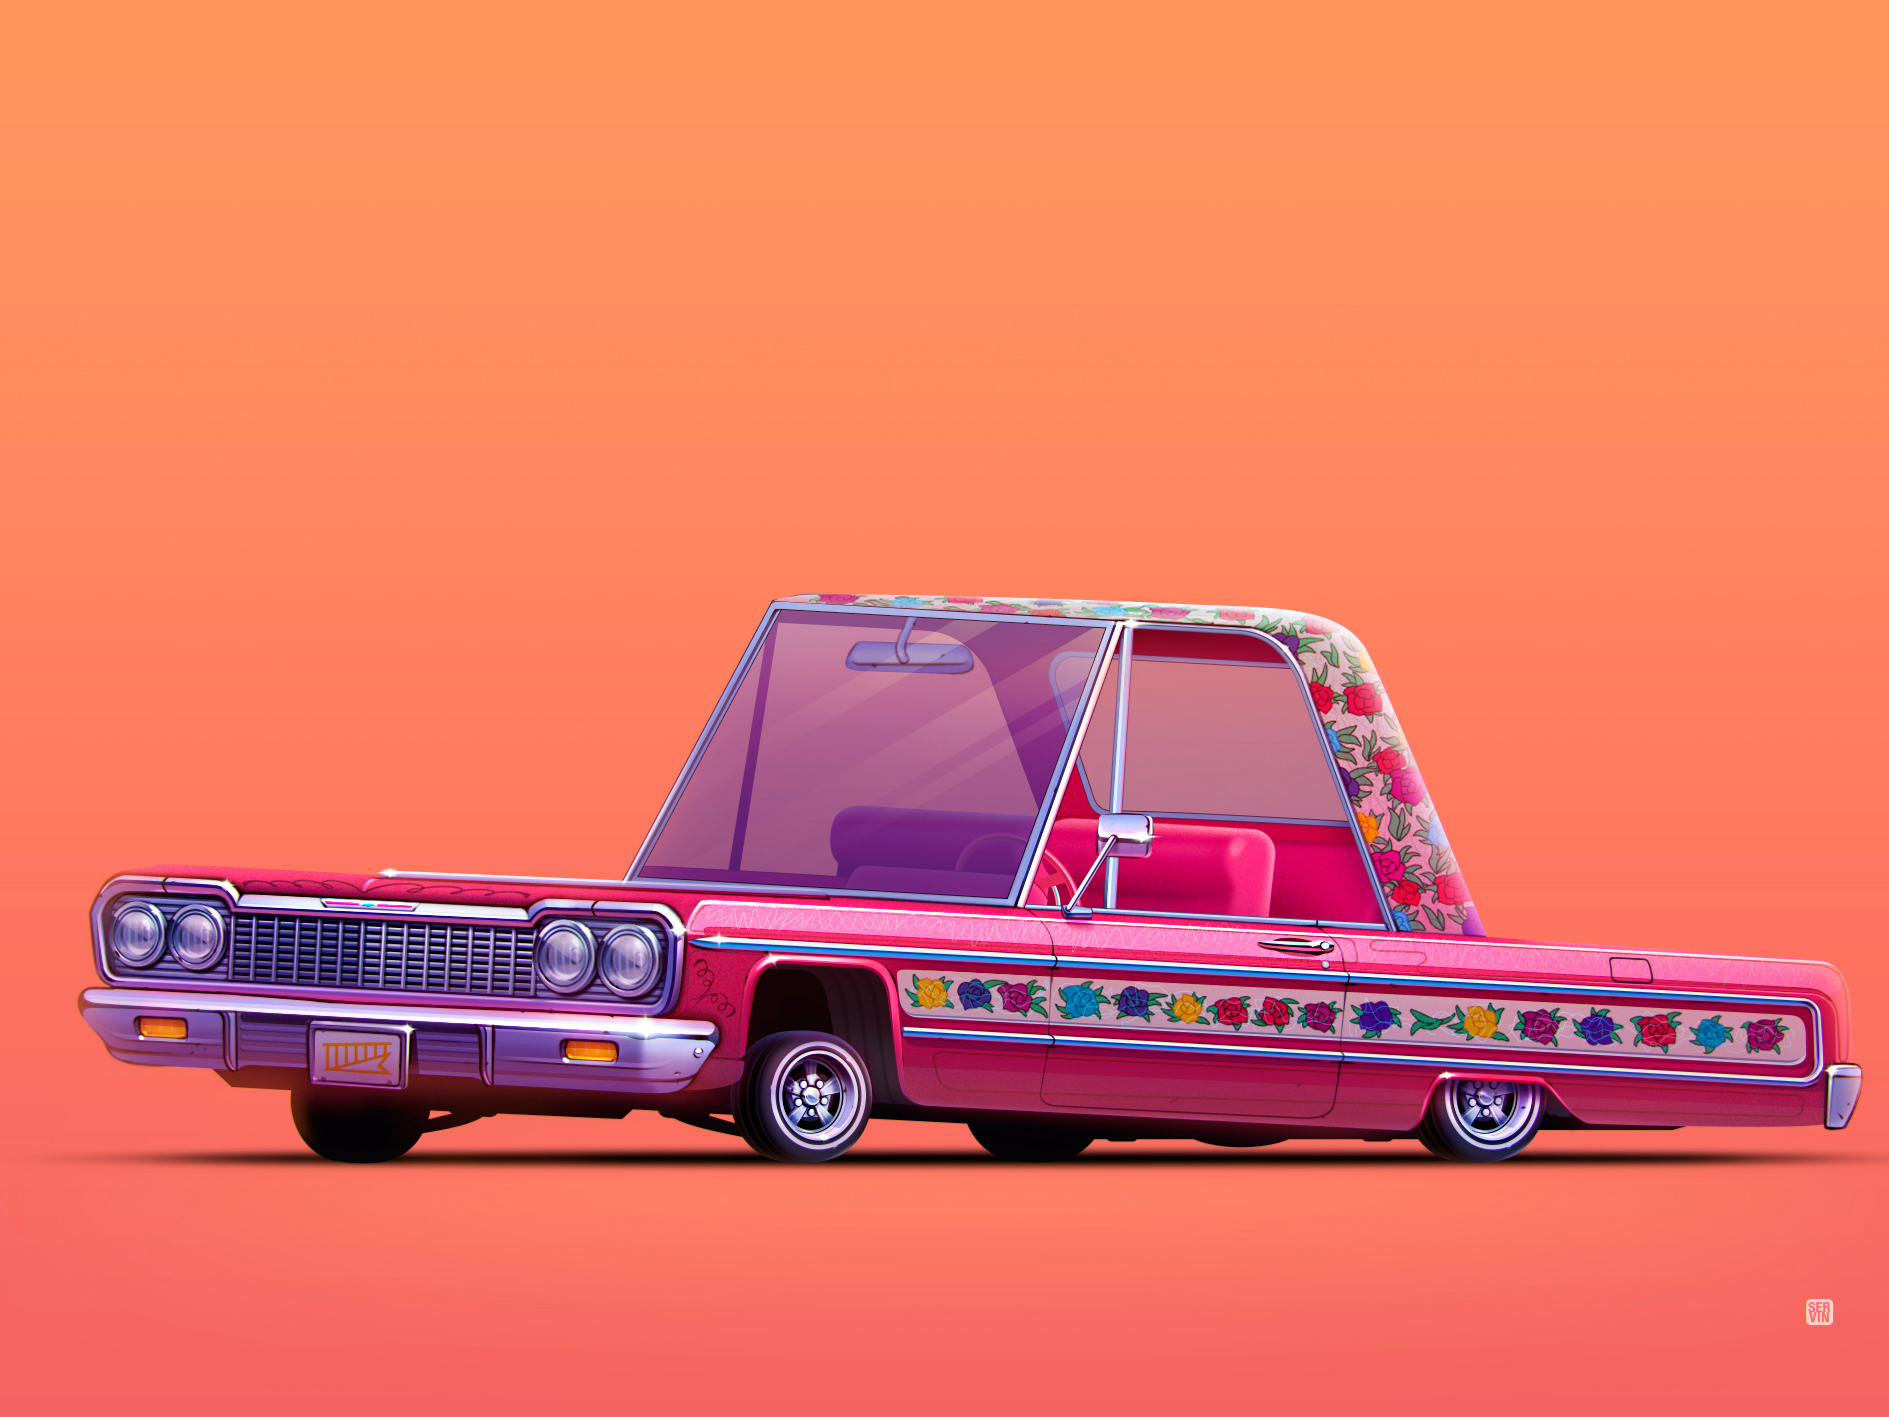 Gypsy Rose Lowrider by Servin on Dribbble